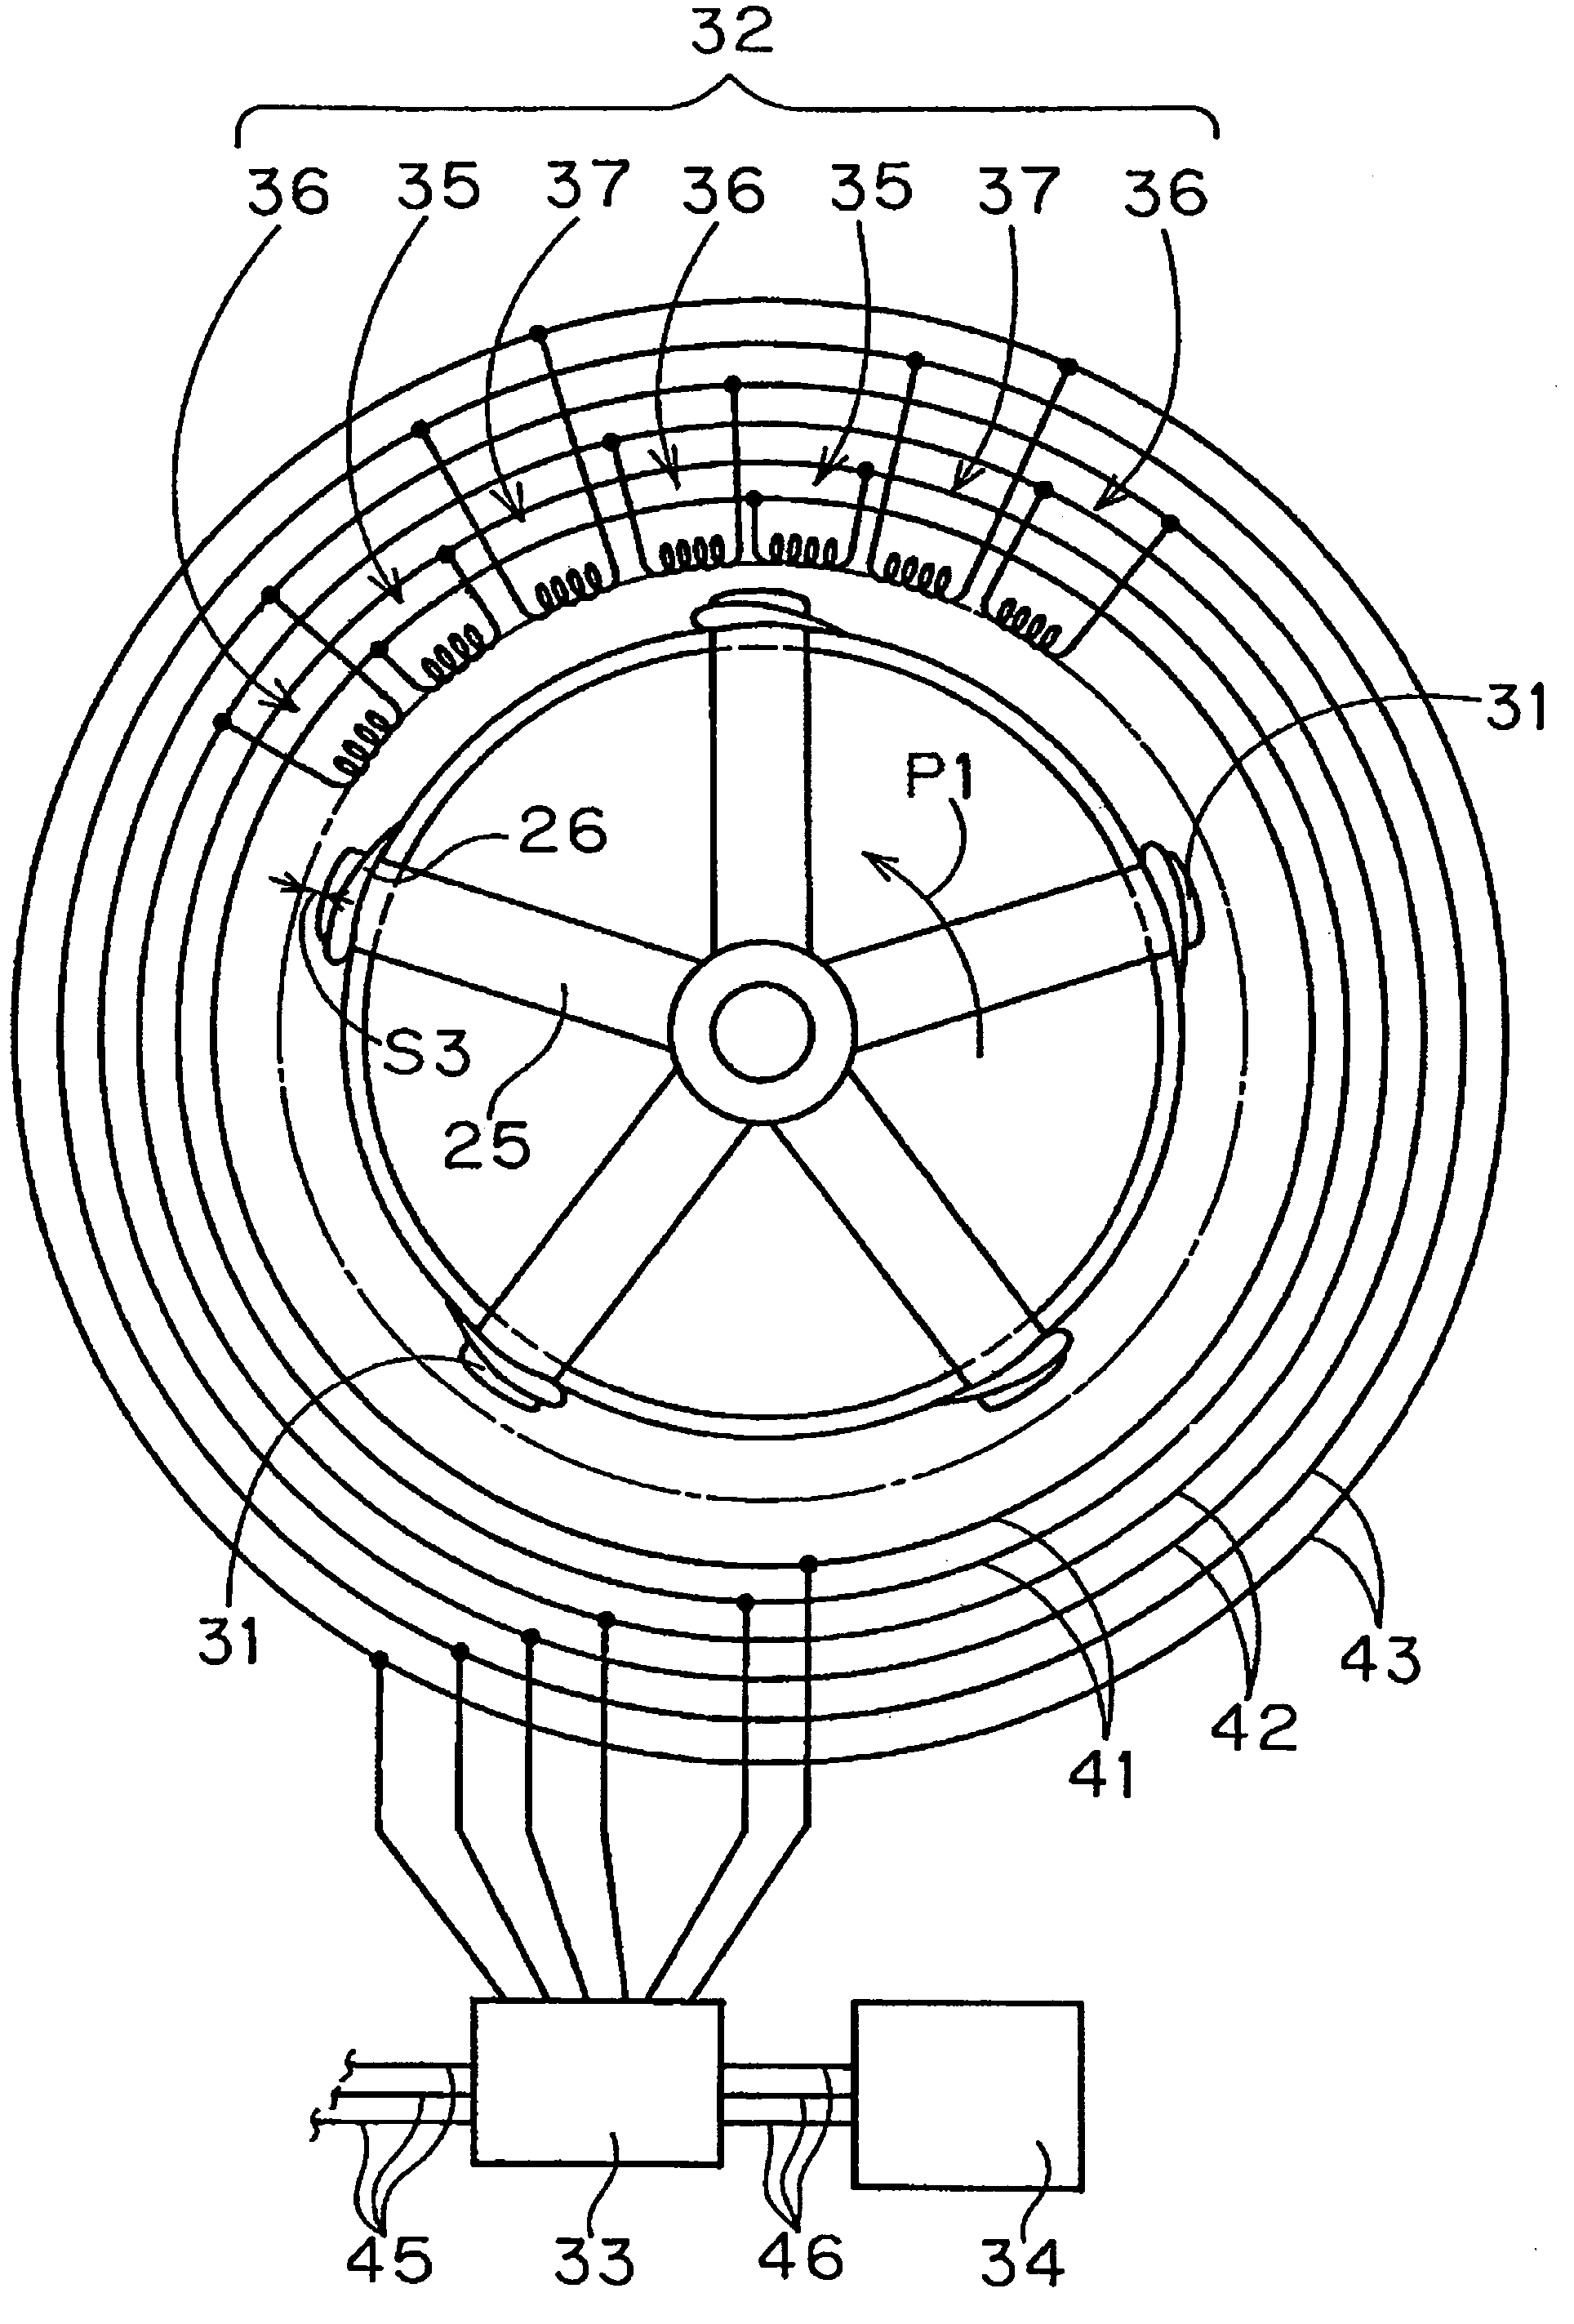 Wind power generation system, arrangement of permanent magnets, and electrical power-mechanical force converter